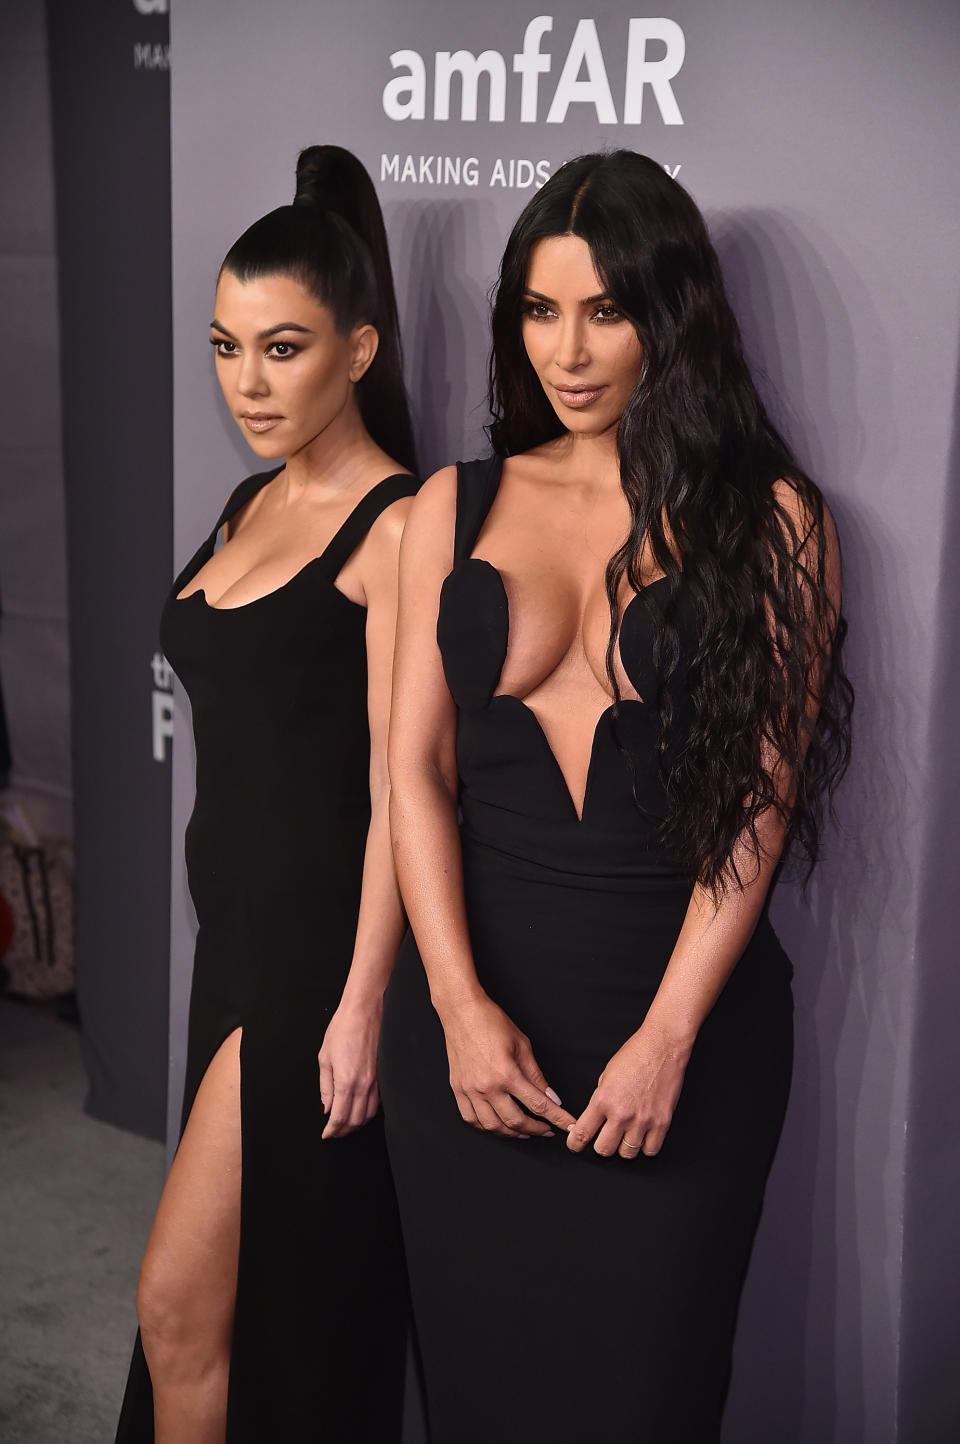 Kourtney and Kim pose on the red carpet together